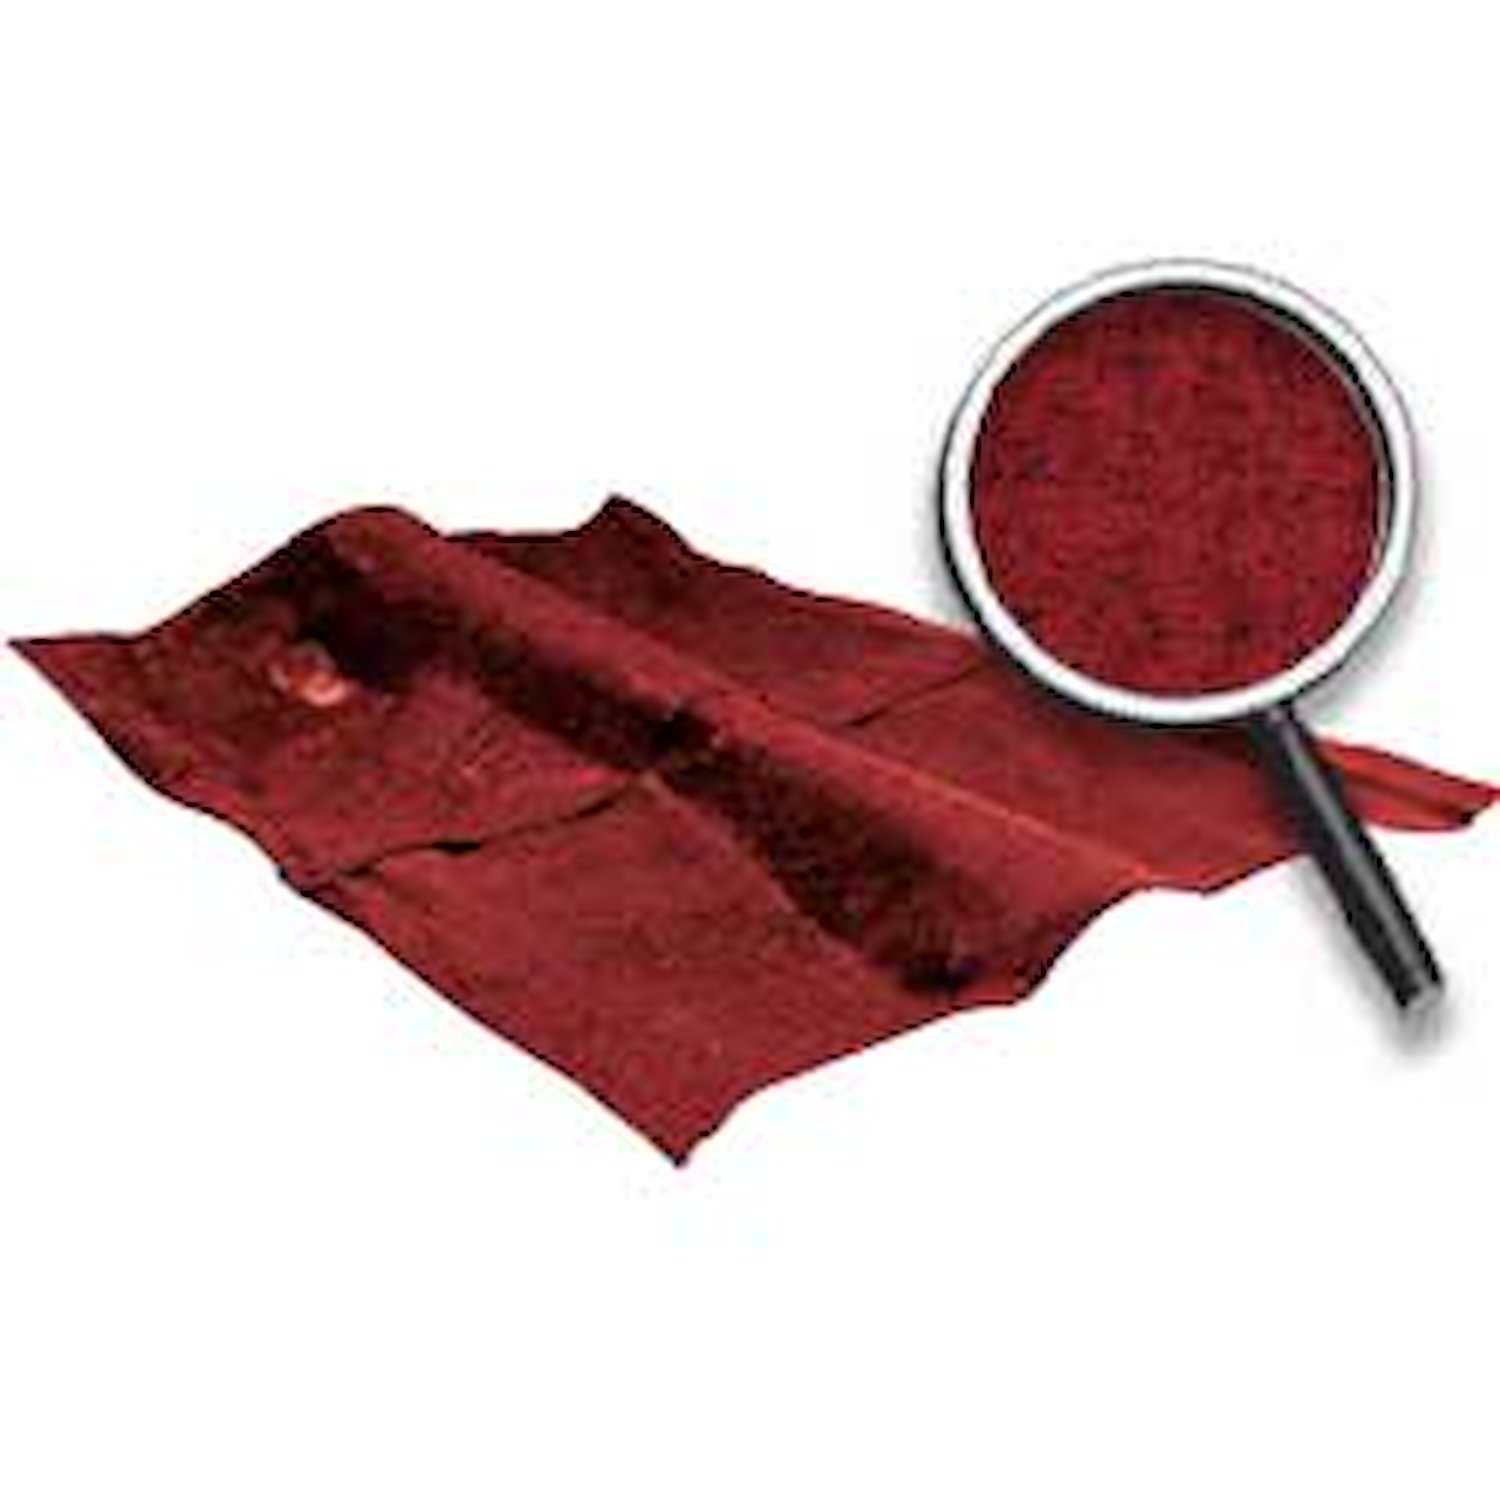 B2818P29 Molded Cut Pile Carpet Set With Mass Backing 1986-87 Chevrolet Caprice 4-Door Dark Red